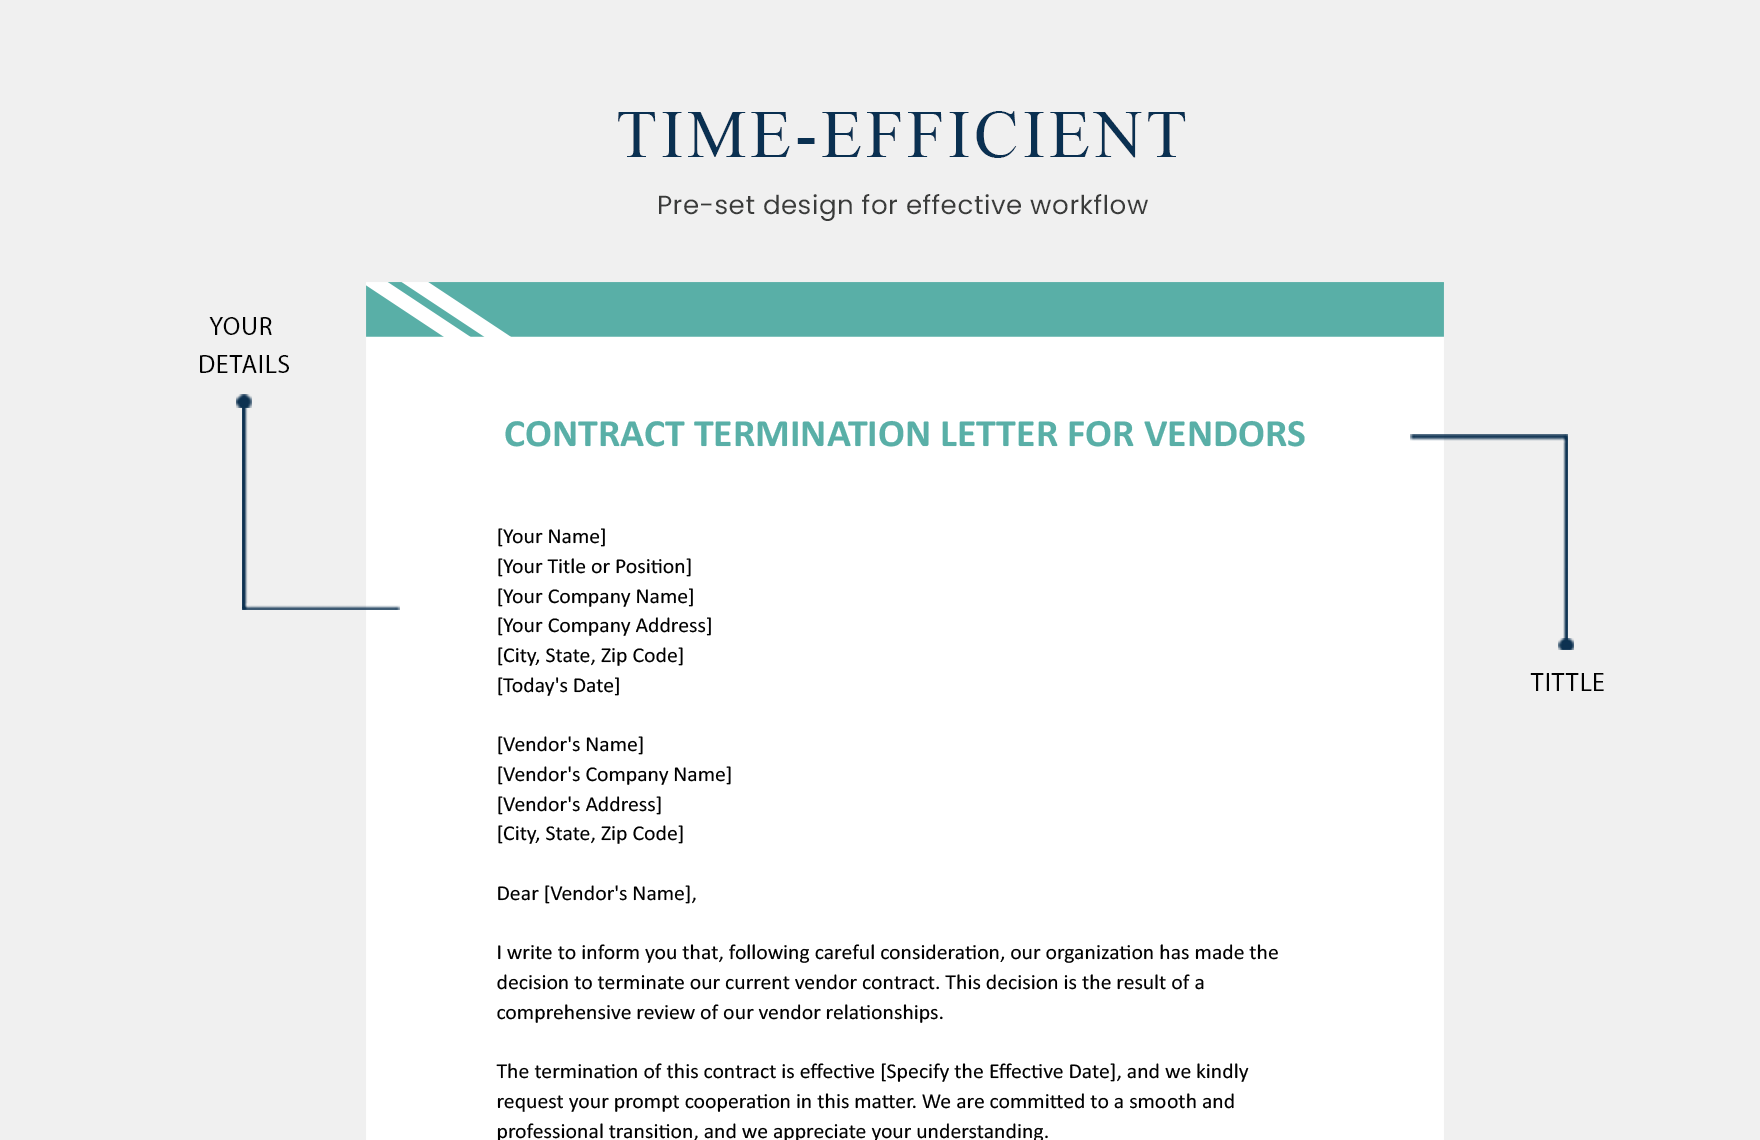 Contract Termination Letter For Vendors